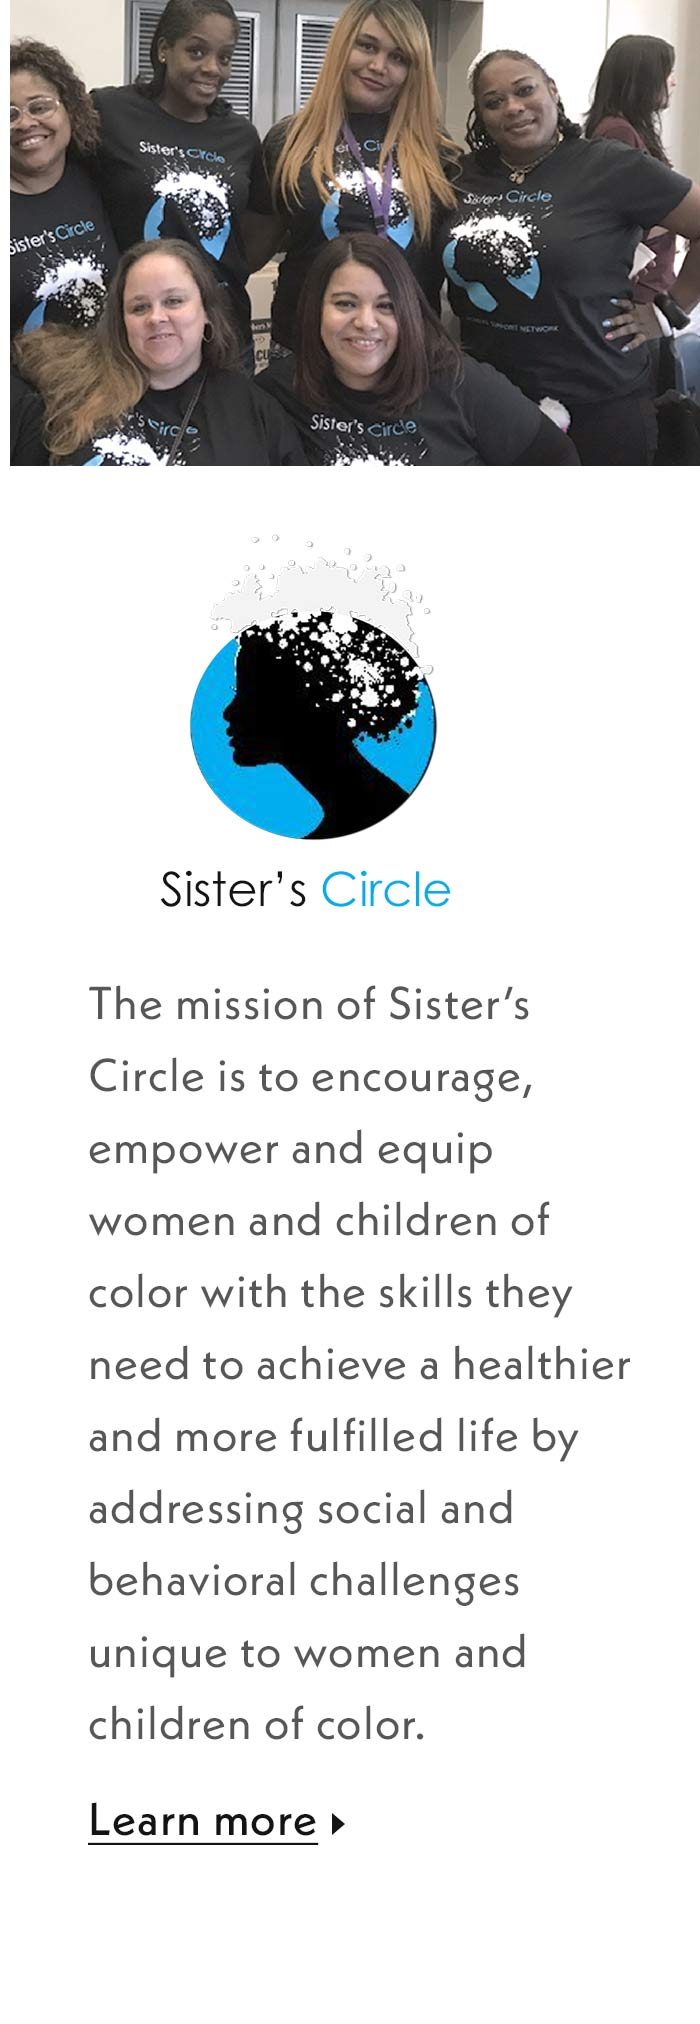 The mission of Sister's Circle is to encourage, empower and equip women and children of color with the skills they need to achieve a healther and more fulfilled life by addressing social and behavioral challenges unique to women and children of color. Learn more.